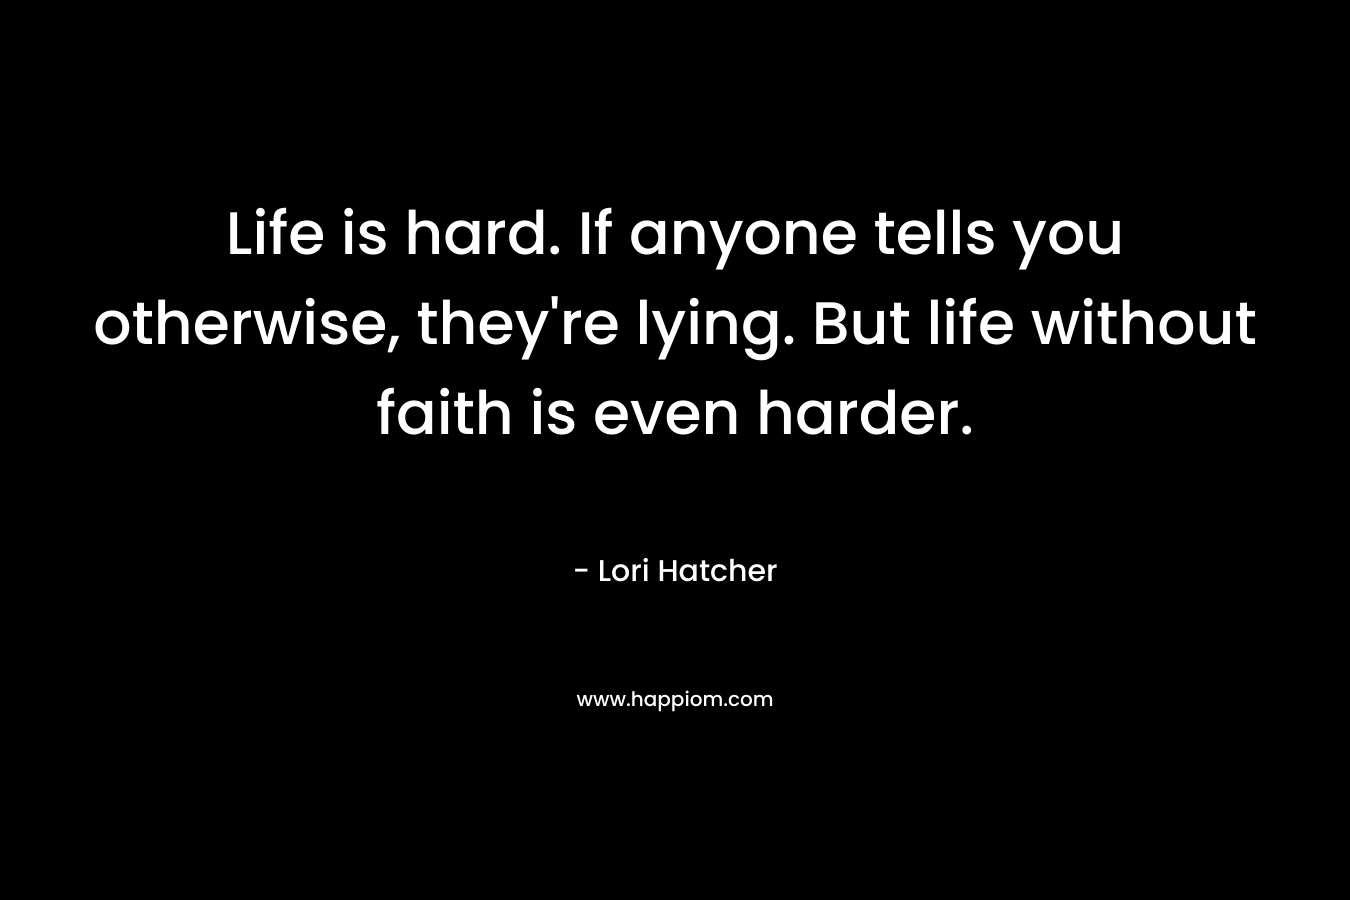 Life is hard. If anyone tells you otherwise, they’re lying. But life without faith is even harder. – Lori Hatcher